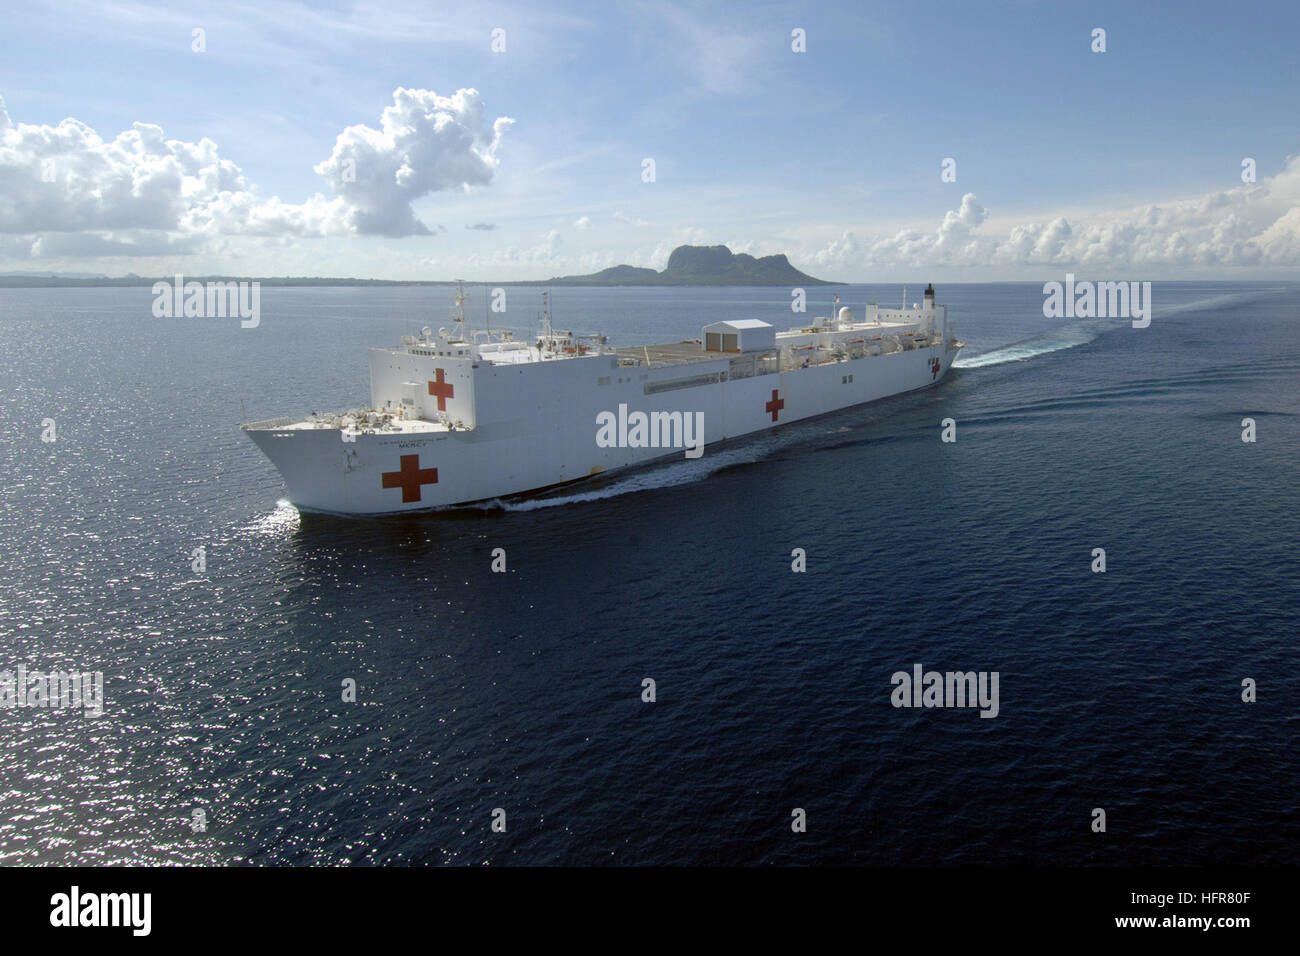 060618-N-6501M-008 Tawi-Tawi, Philippines (June 18, 2006) - The U.S. Military Sealift Command (MSC) Hospital Ship USNS Mercy (T-AH 19) sets sail for Sembawang, Singapore, after its four-week stay in the South Philippines. Mercy is on a five-month deployment to South Asia, Southeast Asia, and the Pacific Islands. The medical crew aboard Mercy will provide general and ophthalmology surgery, basic medical evaluation and treatment, preventive medicine treatment, dental screenings and treatment, optometry screenings, eyewear distribution, public health training and veterinary services as requested  Stock Photo